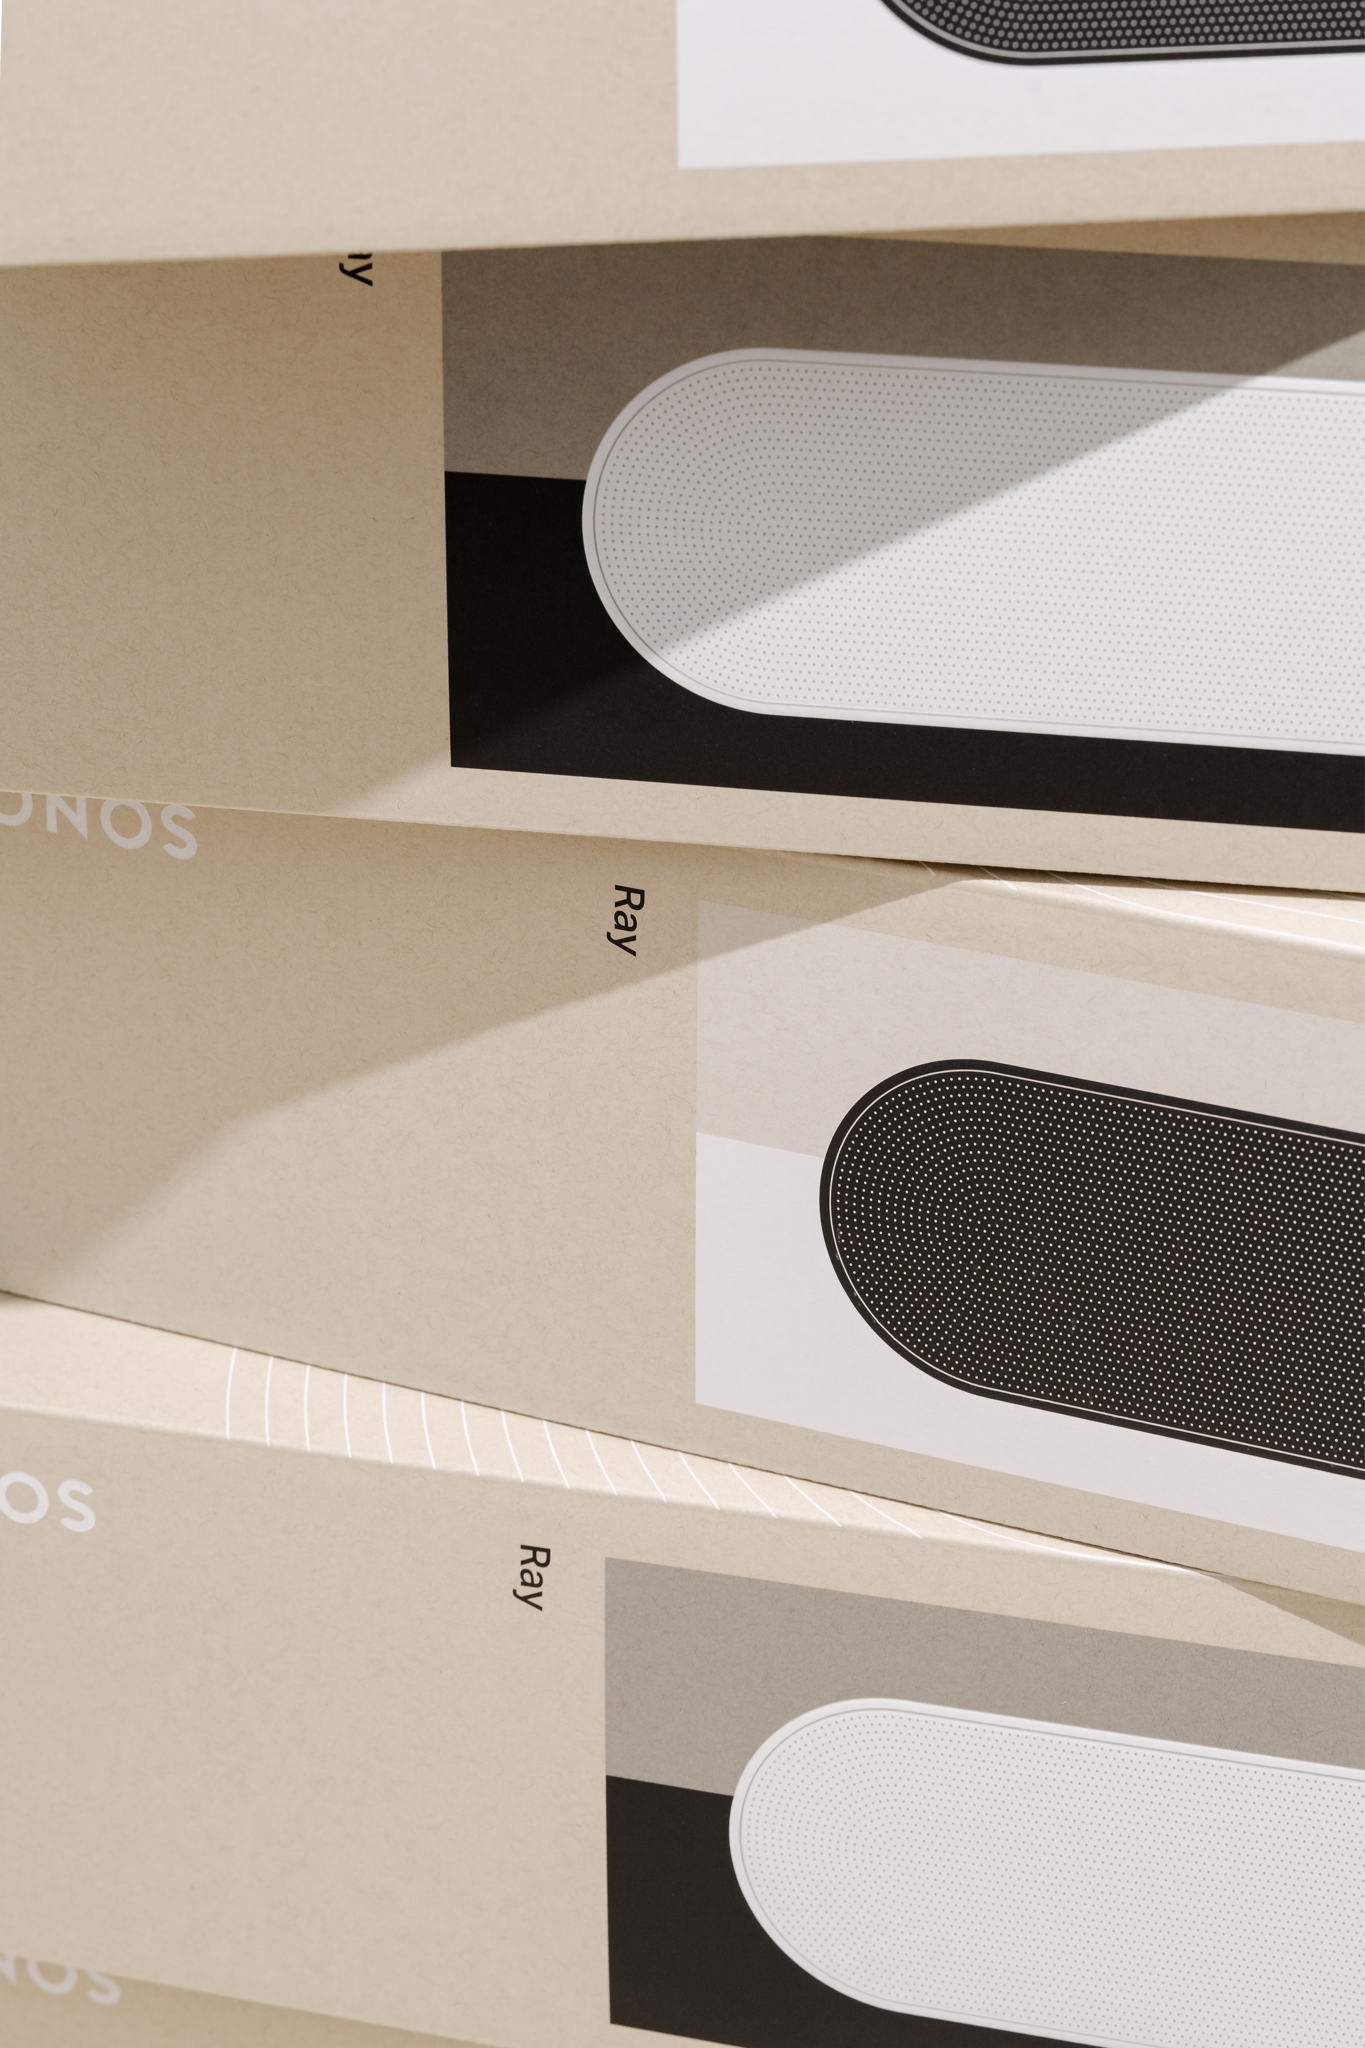 sonos-ray-packaging-photography-stacked-boxes-detail-01.jpg